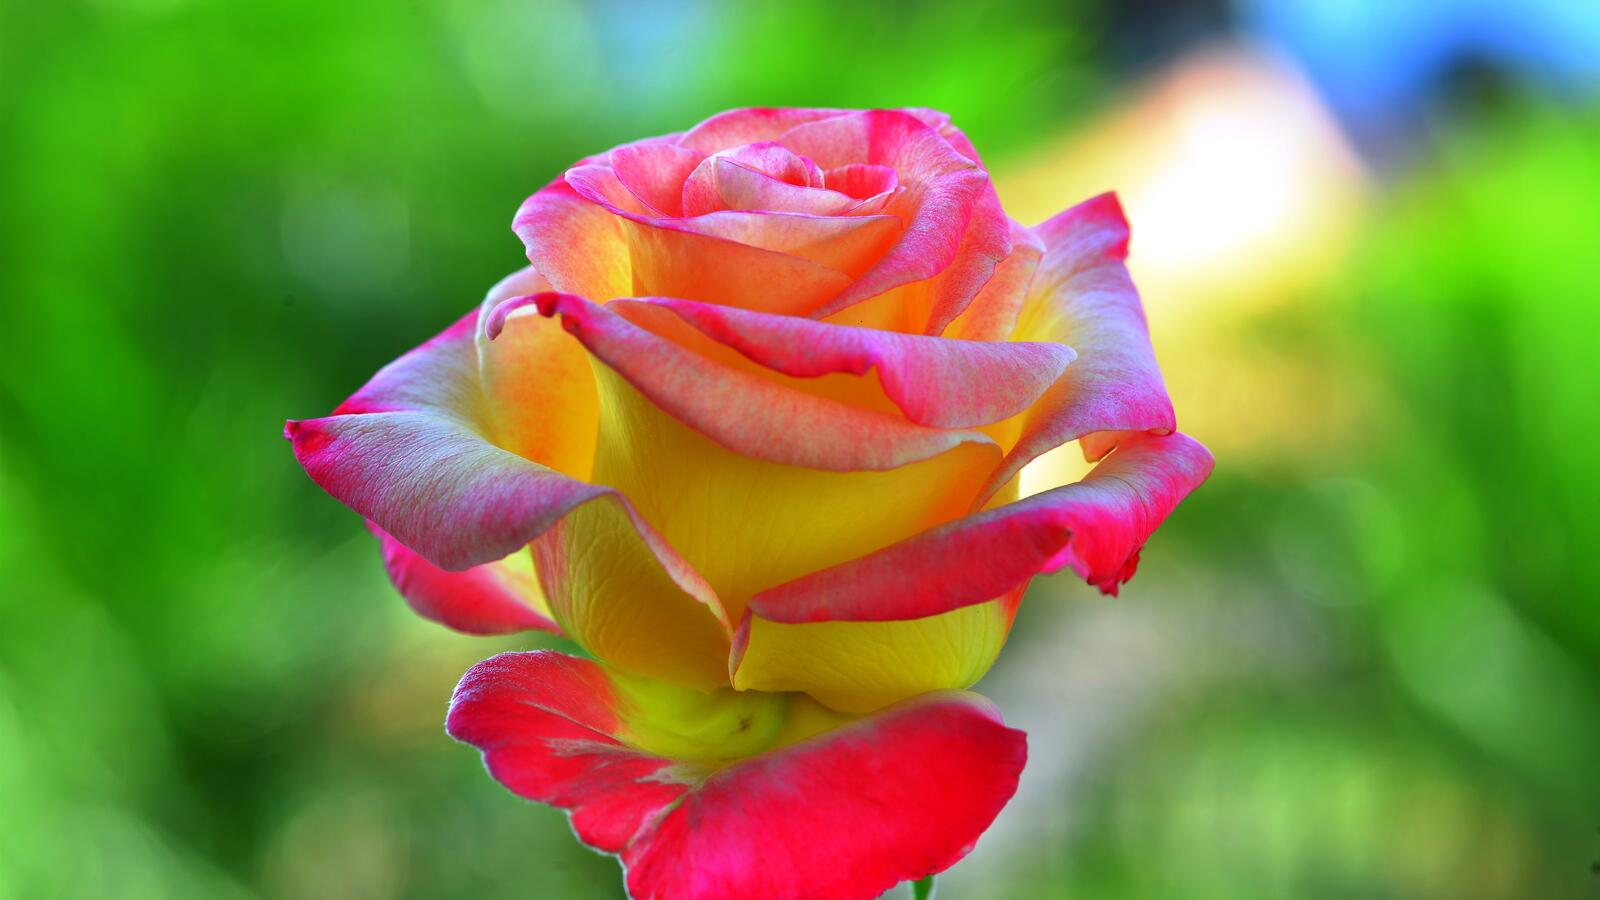 Free photo A yellow rose of unusual pink blooms